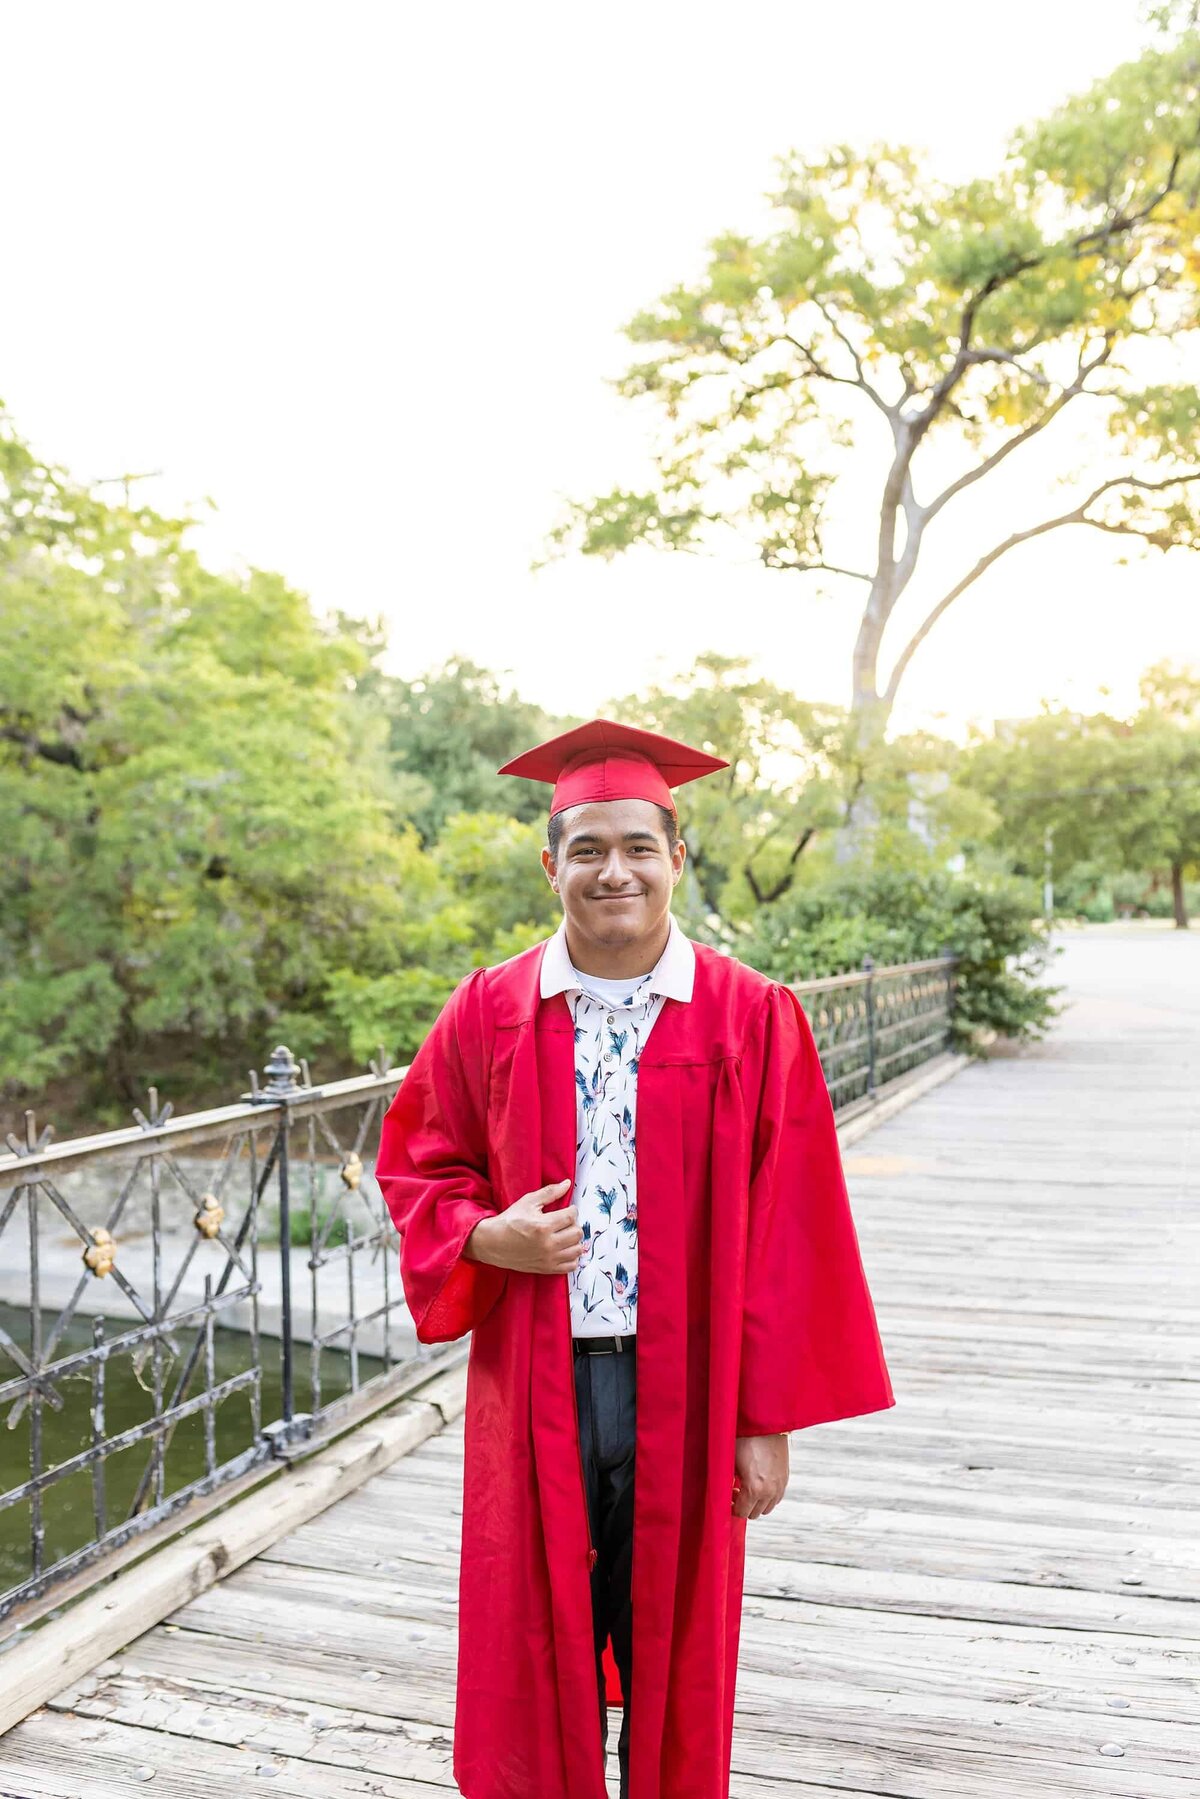 Senior in red cap and gown